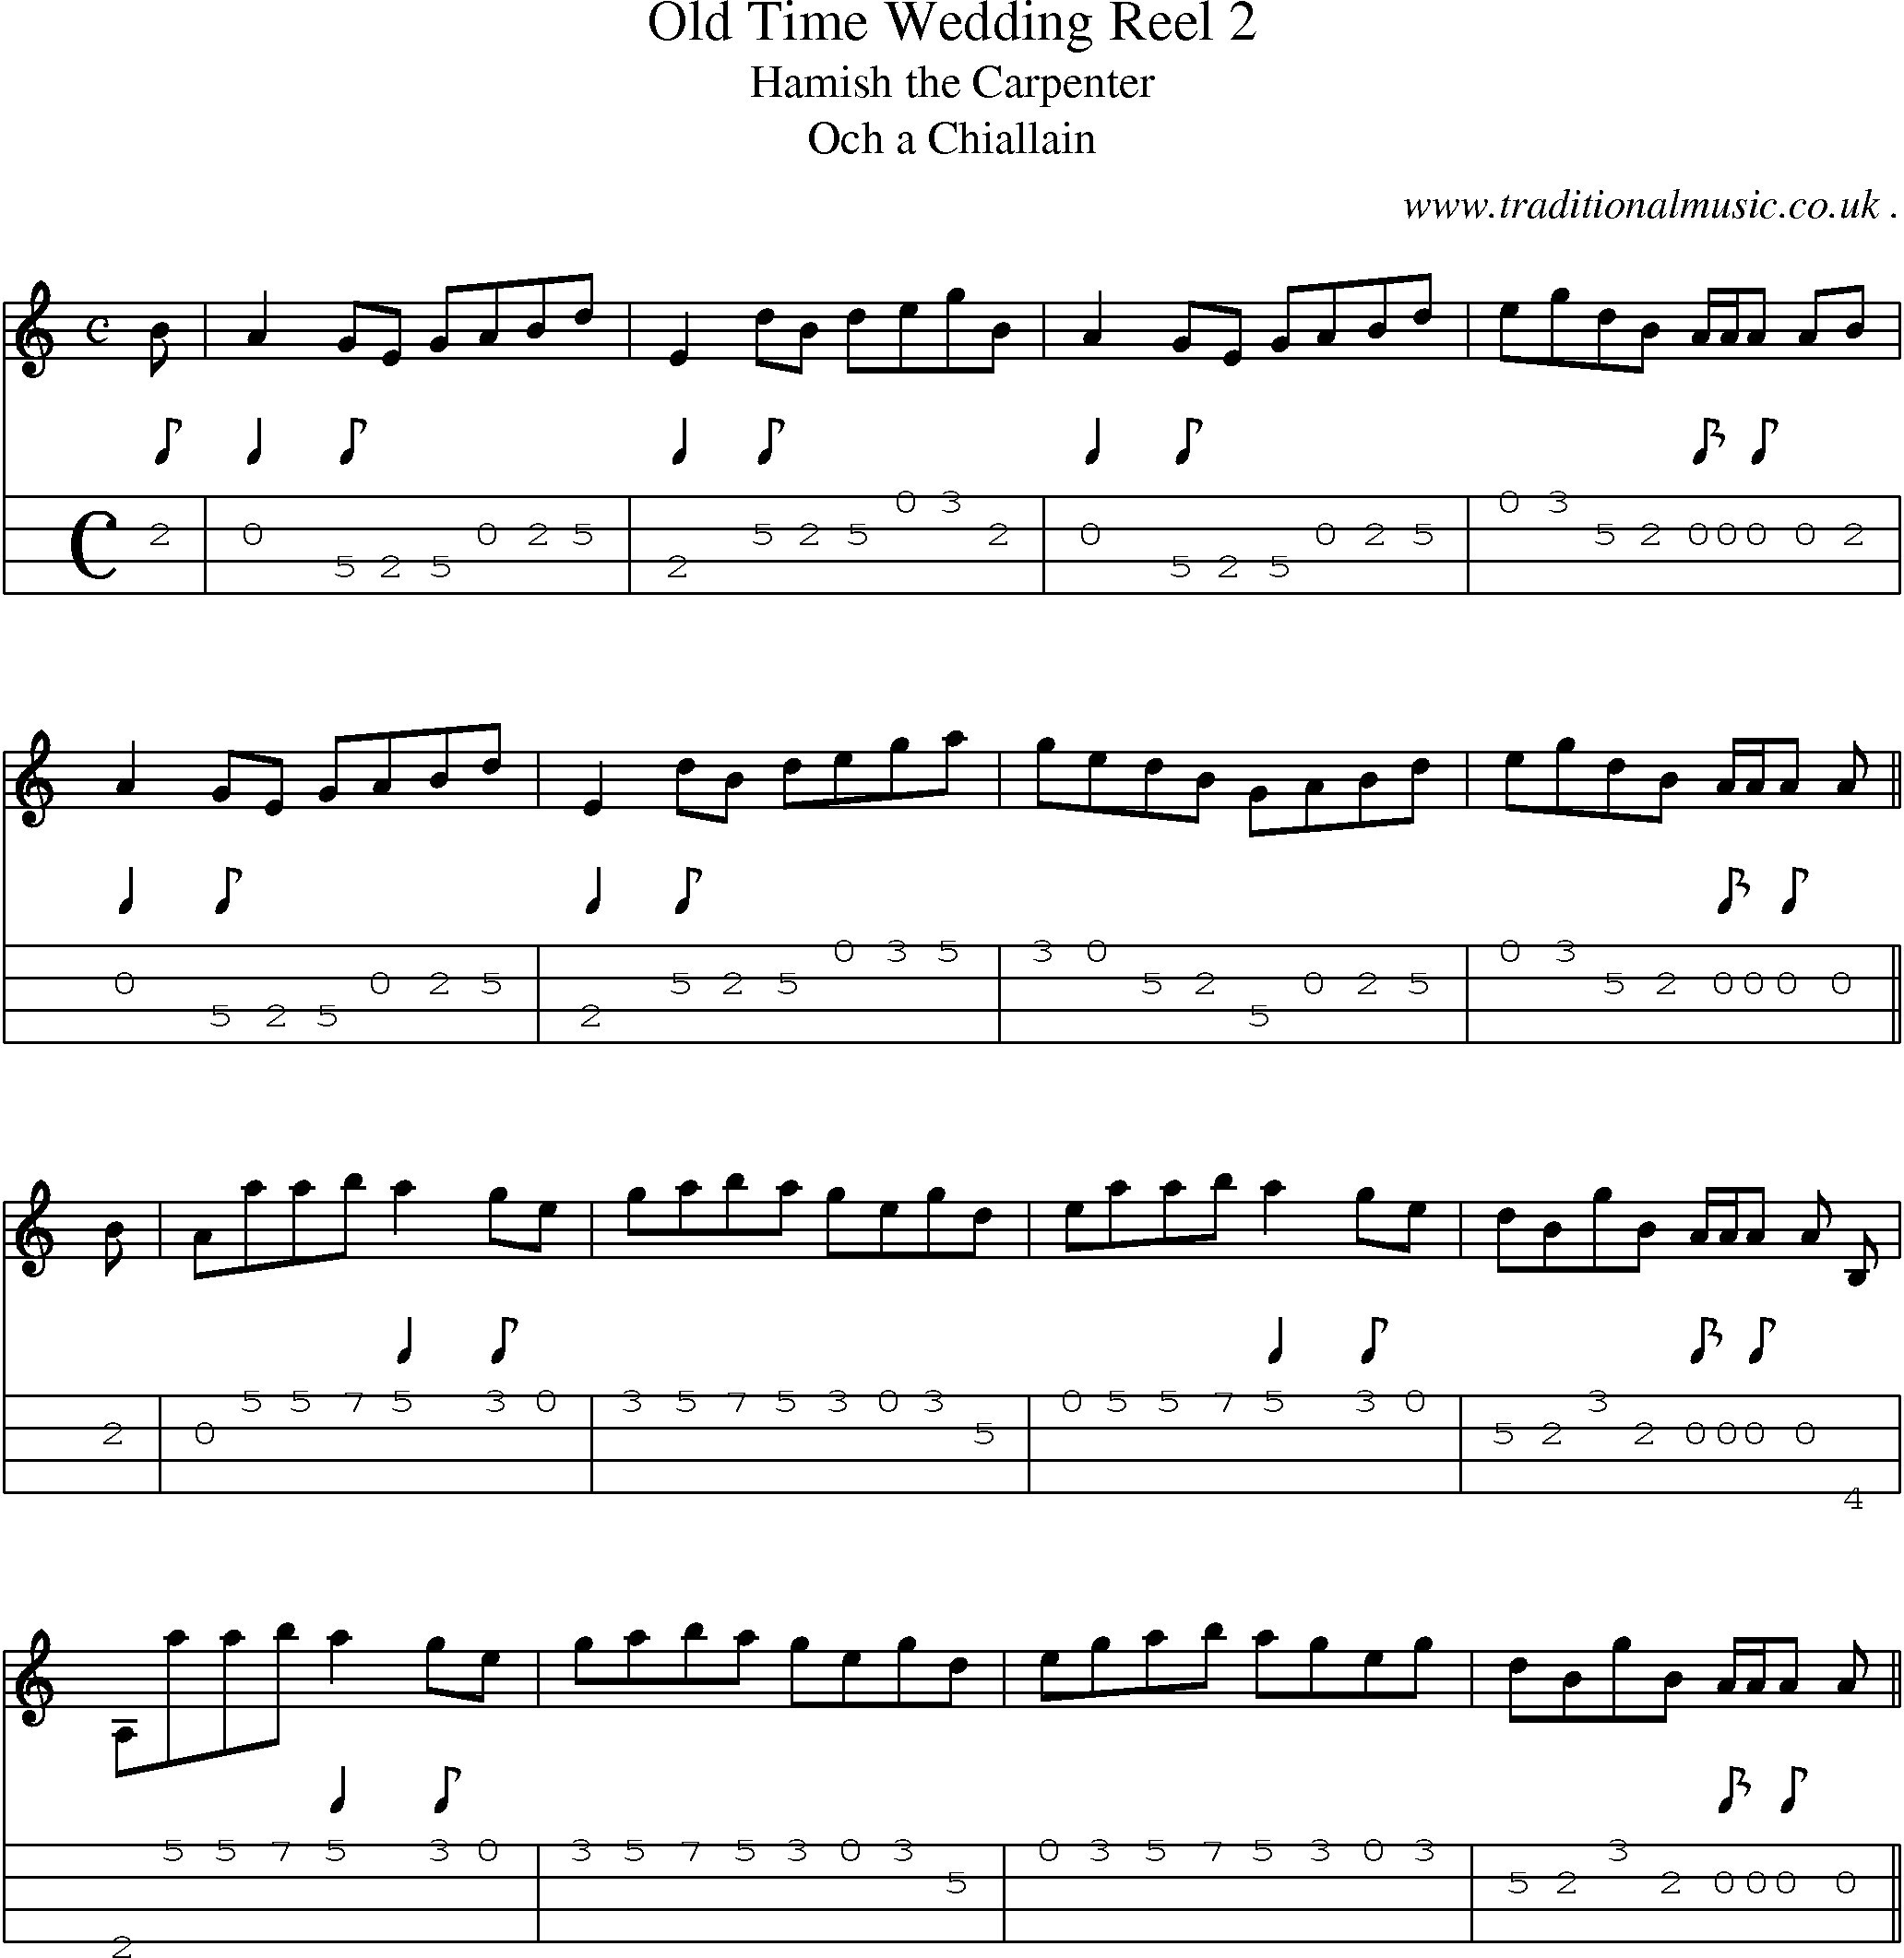 Music Score and Mandolin Tabs for Old Time Wedding Reel 2